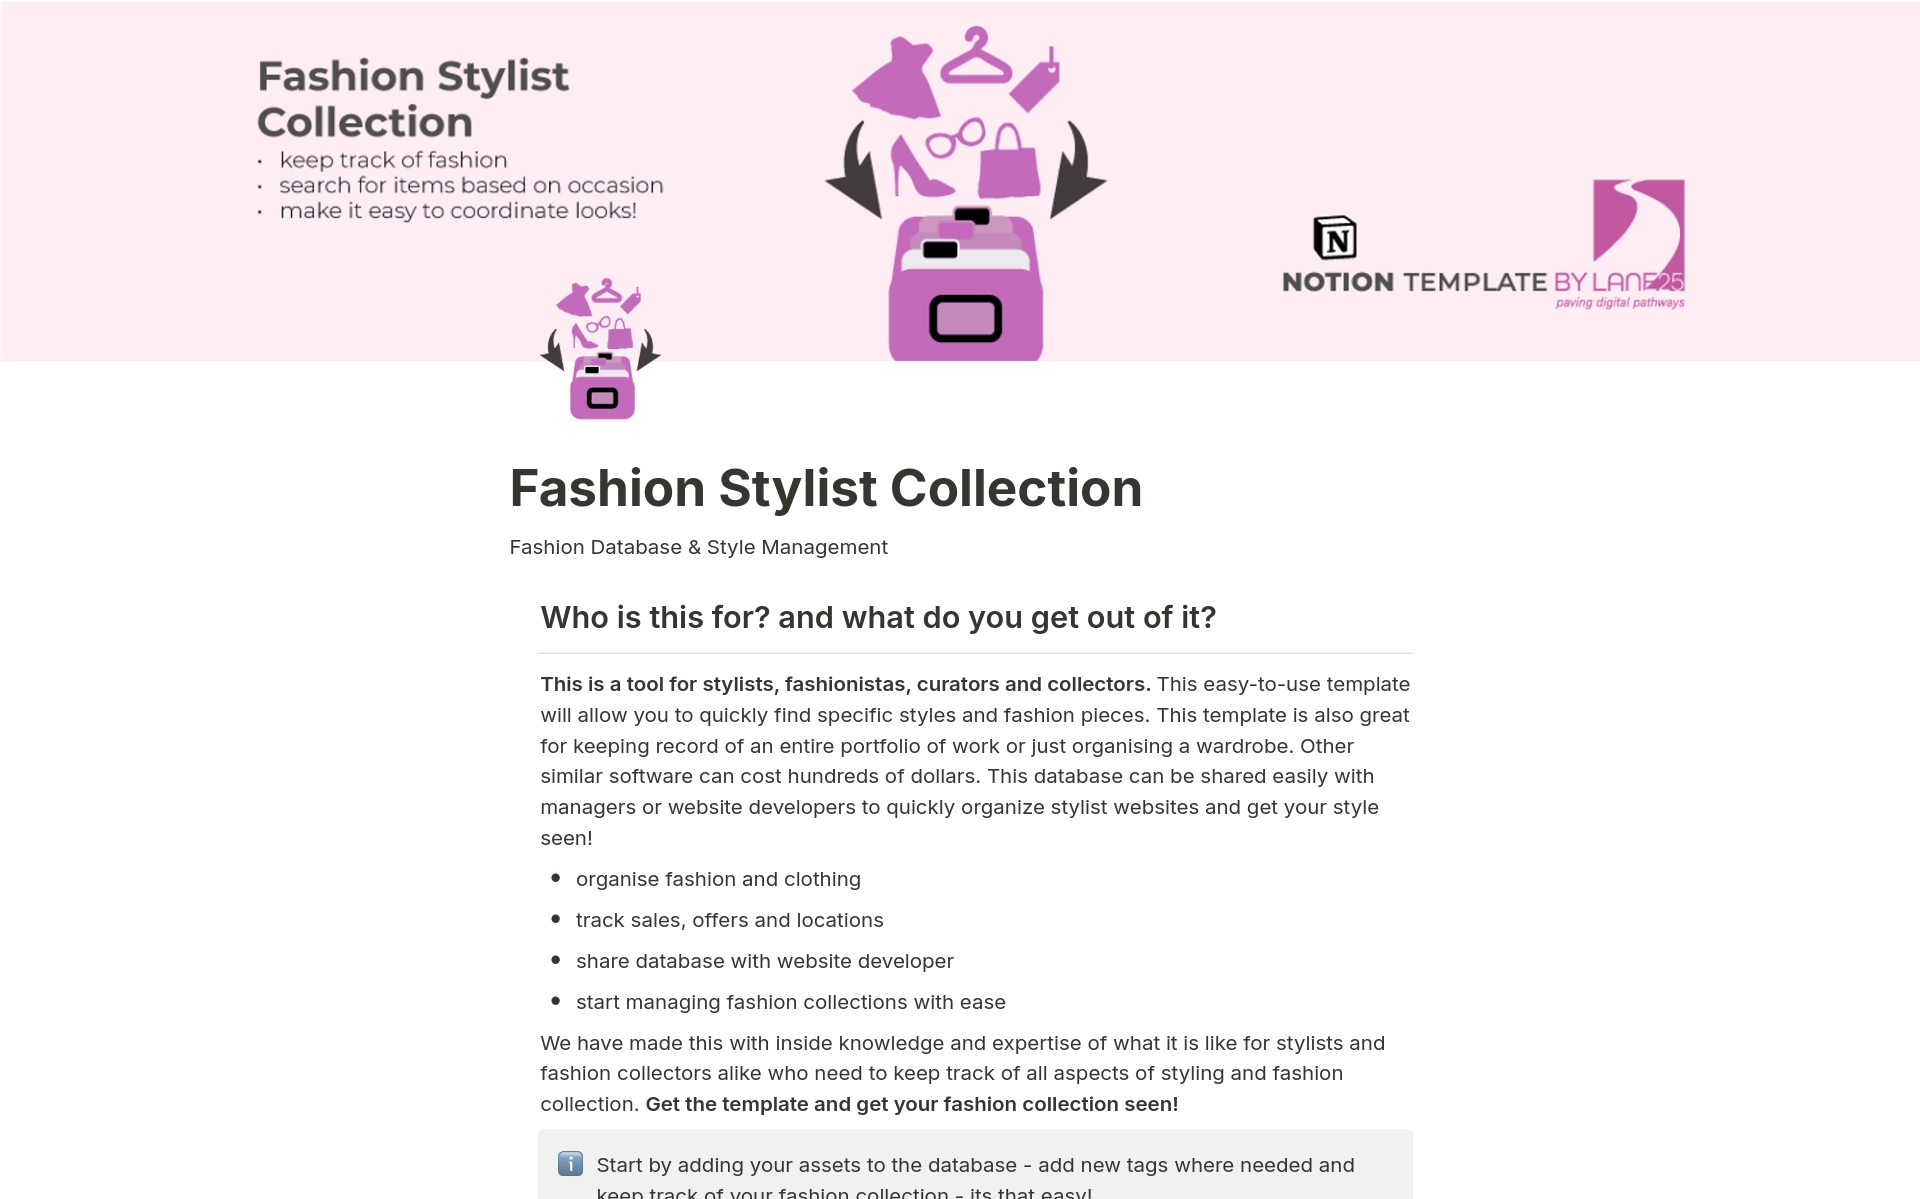 This is a tool for stylists, fashionistas, curators and collectors. This easy-to-use template will allow you to quickly find specific styles and fashion pieces. This template is also great for keeping record of an entire portfolio or collection or just organising a wardrobe.